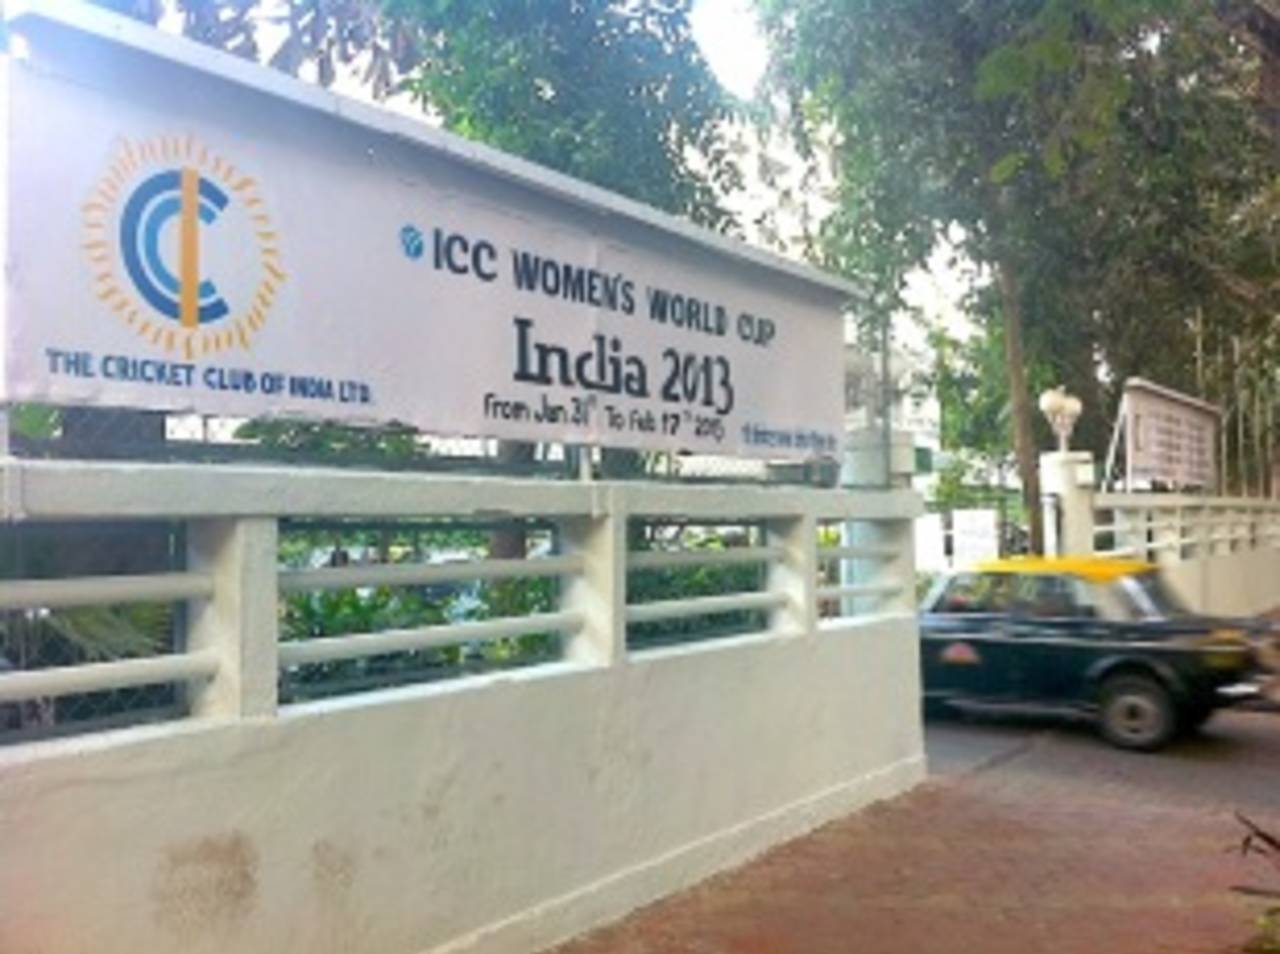 There's not much signage publicising the tournament in Mumbai&nbsp;&nbsp;&bull;&nbsp;&nbsp;Alison Mitchell